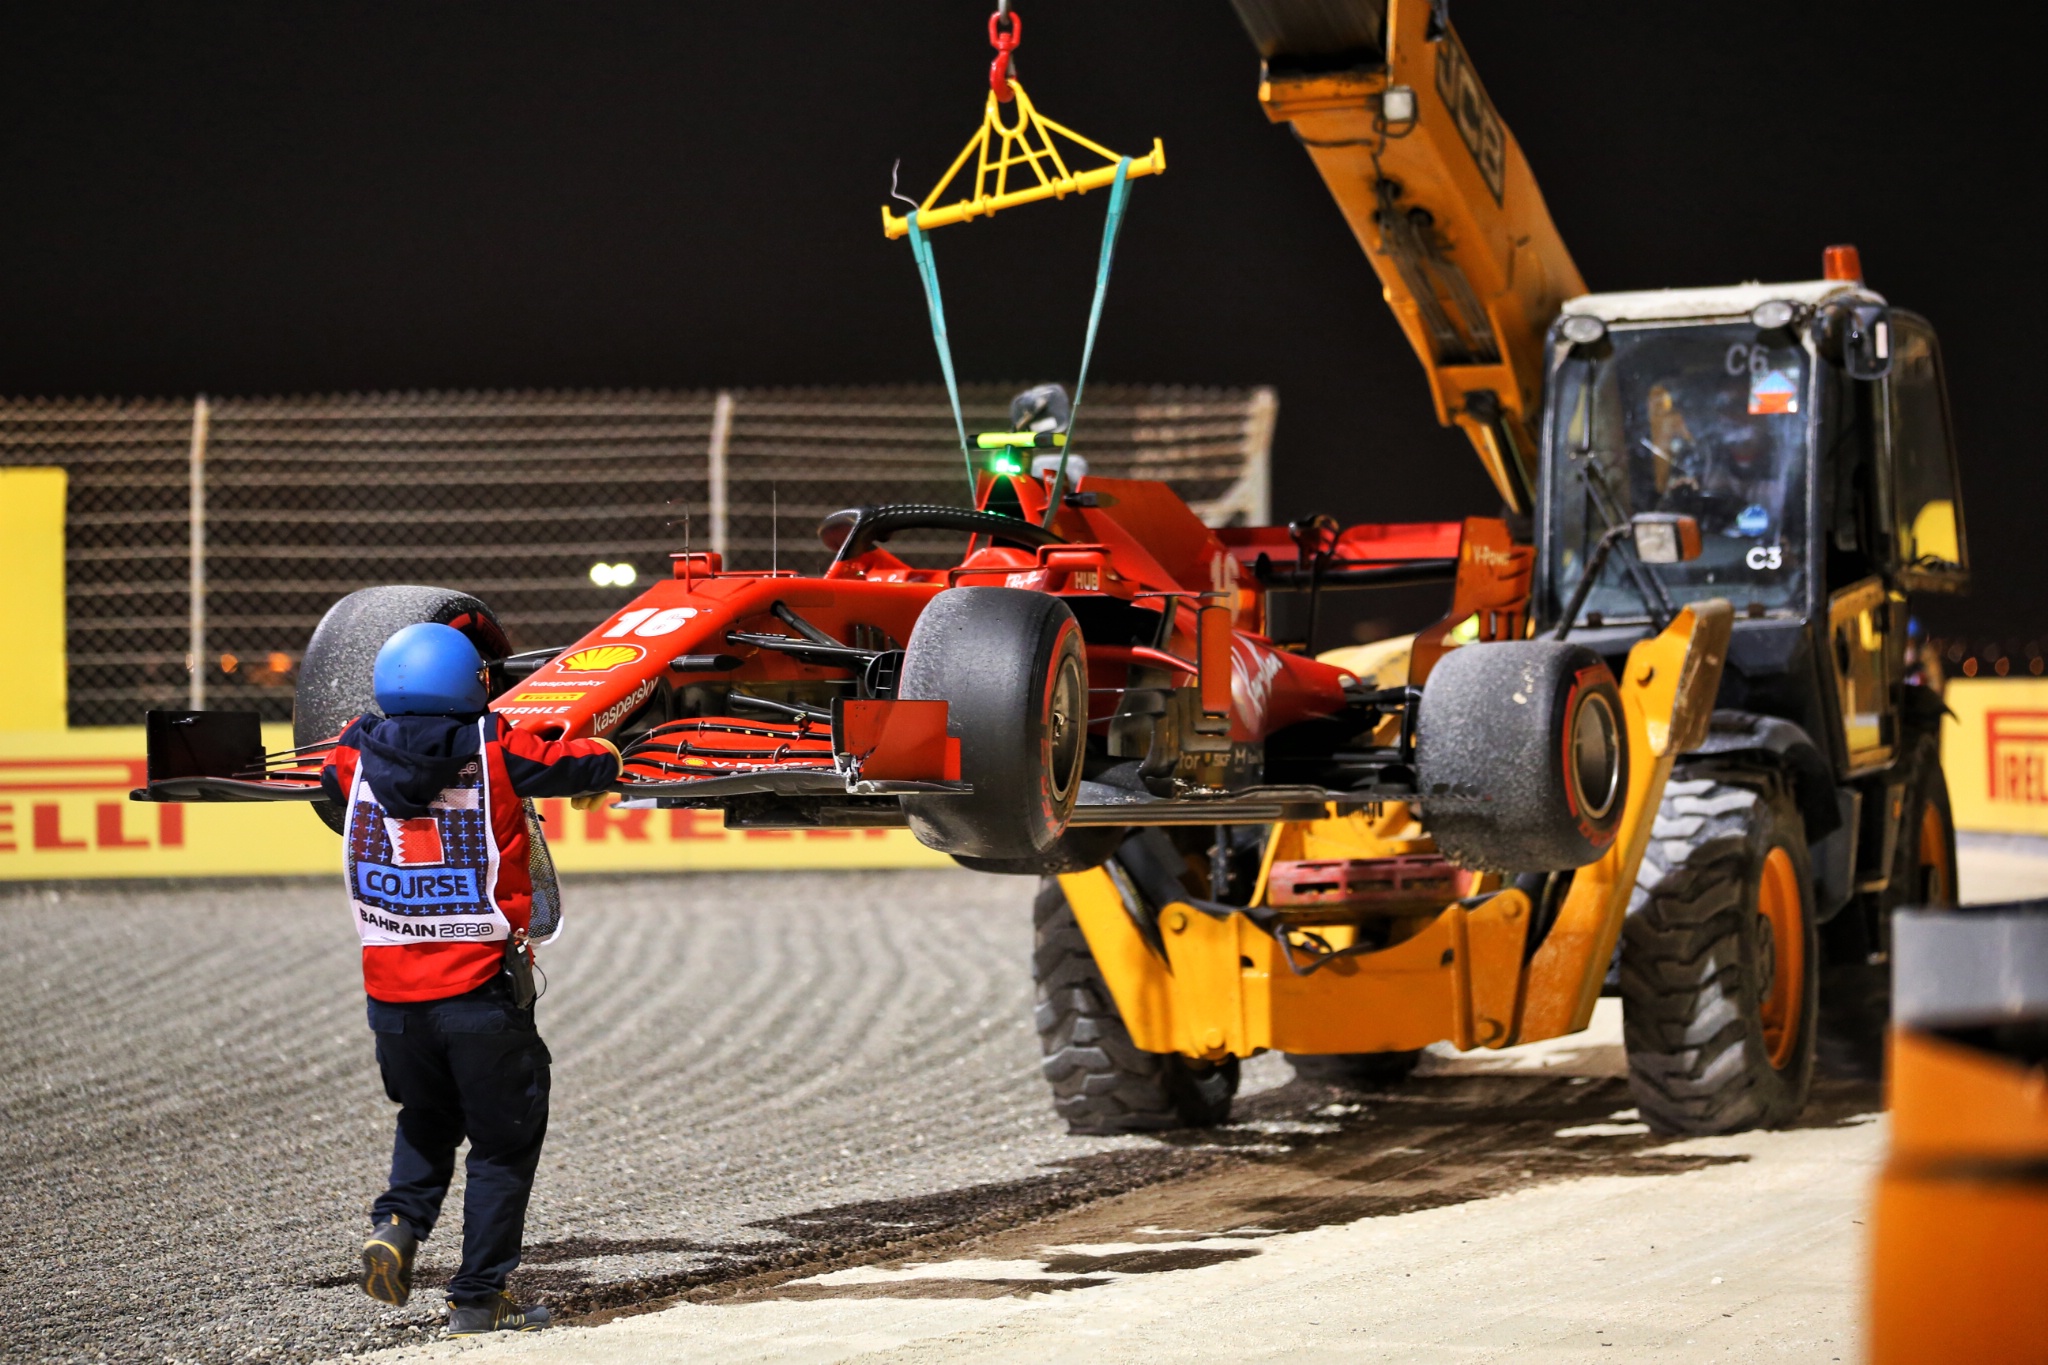 The Ferrari SF1000 of race retiree Charles Leclerc (MON) Ferrari is removed from the circuit.